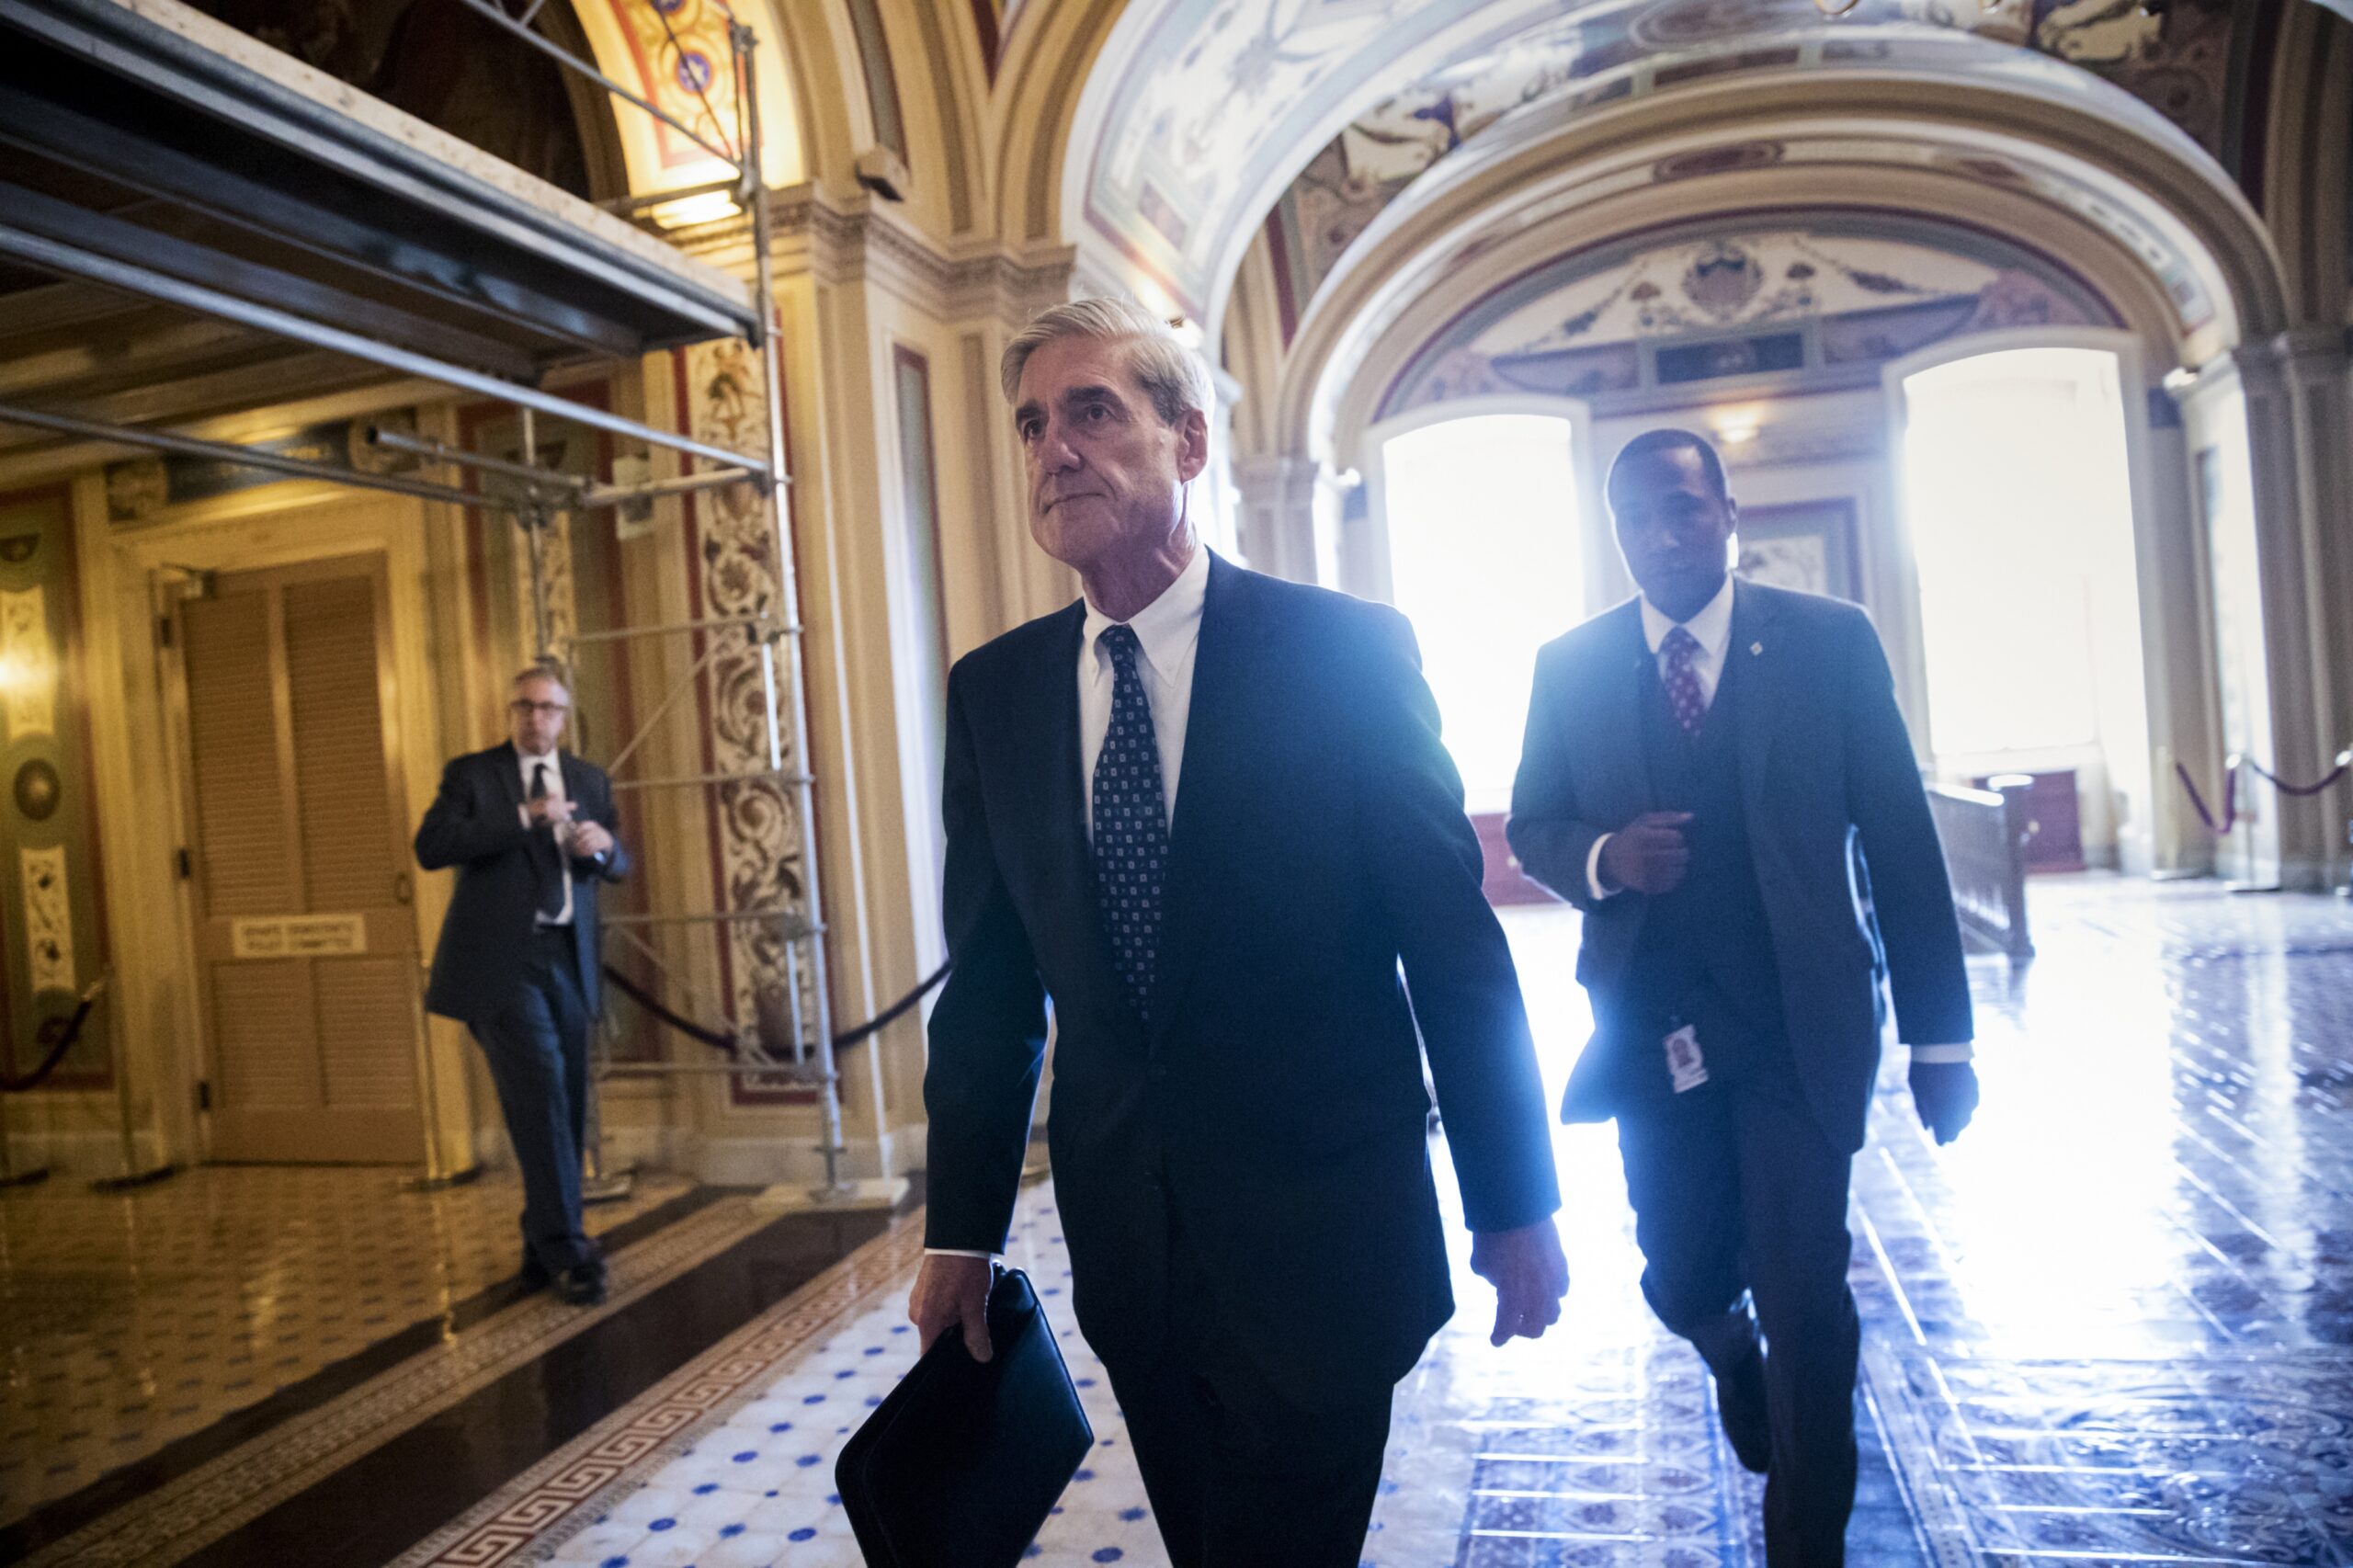 Robert Mueller walking through the Capitol with two men and the sun behind him